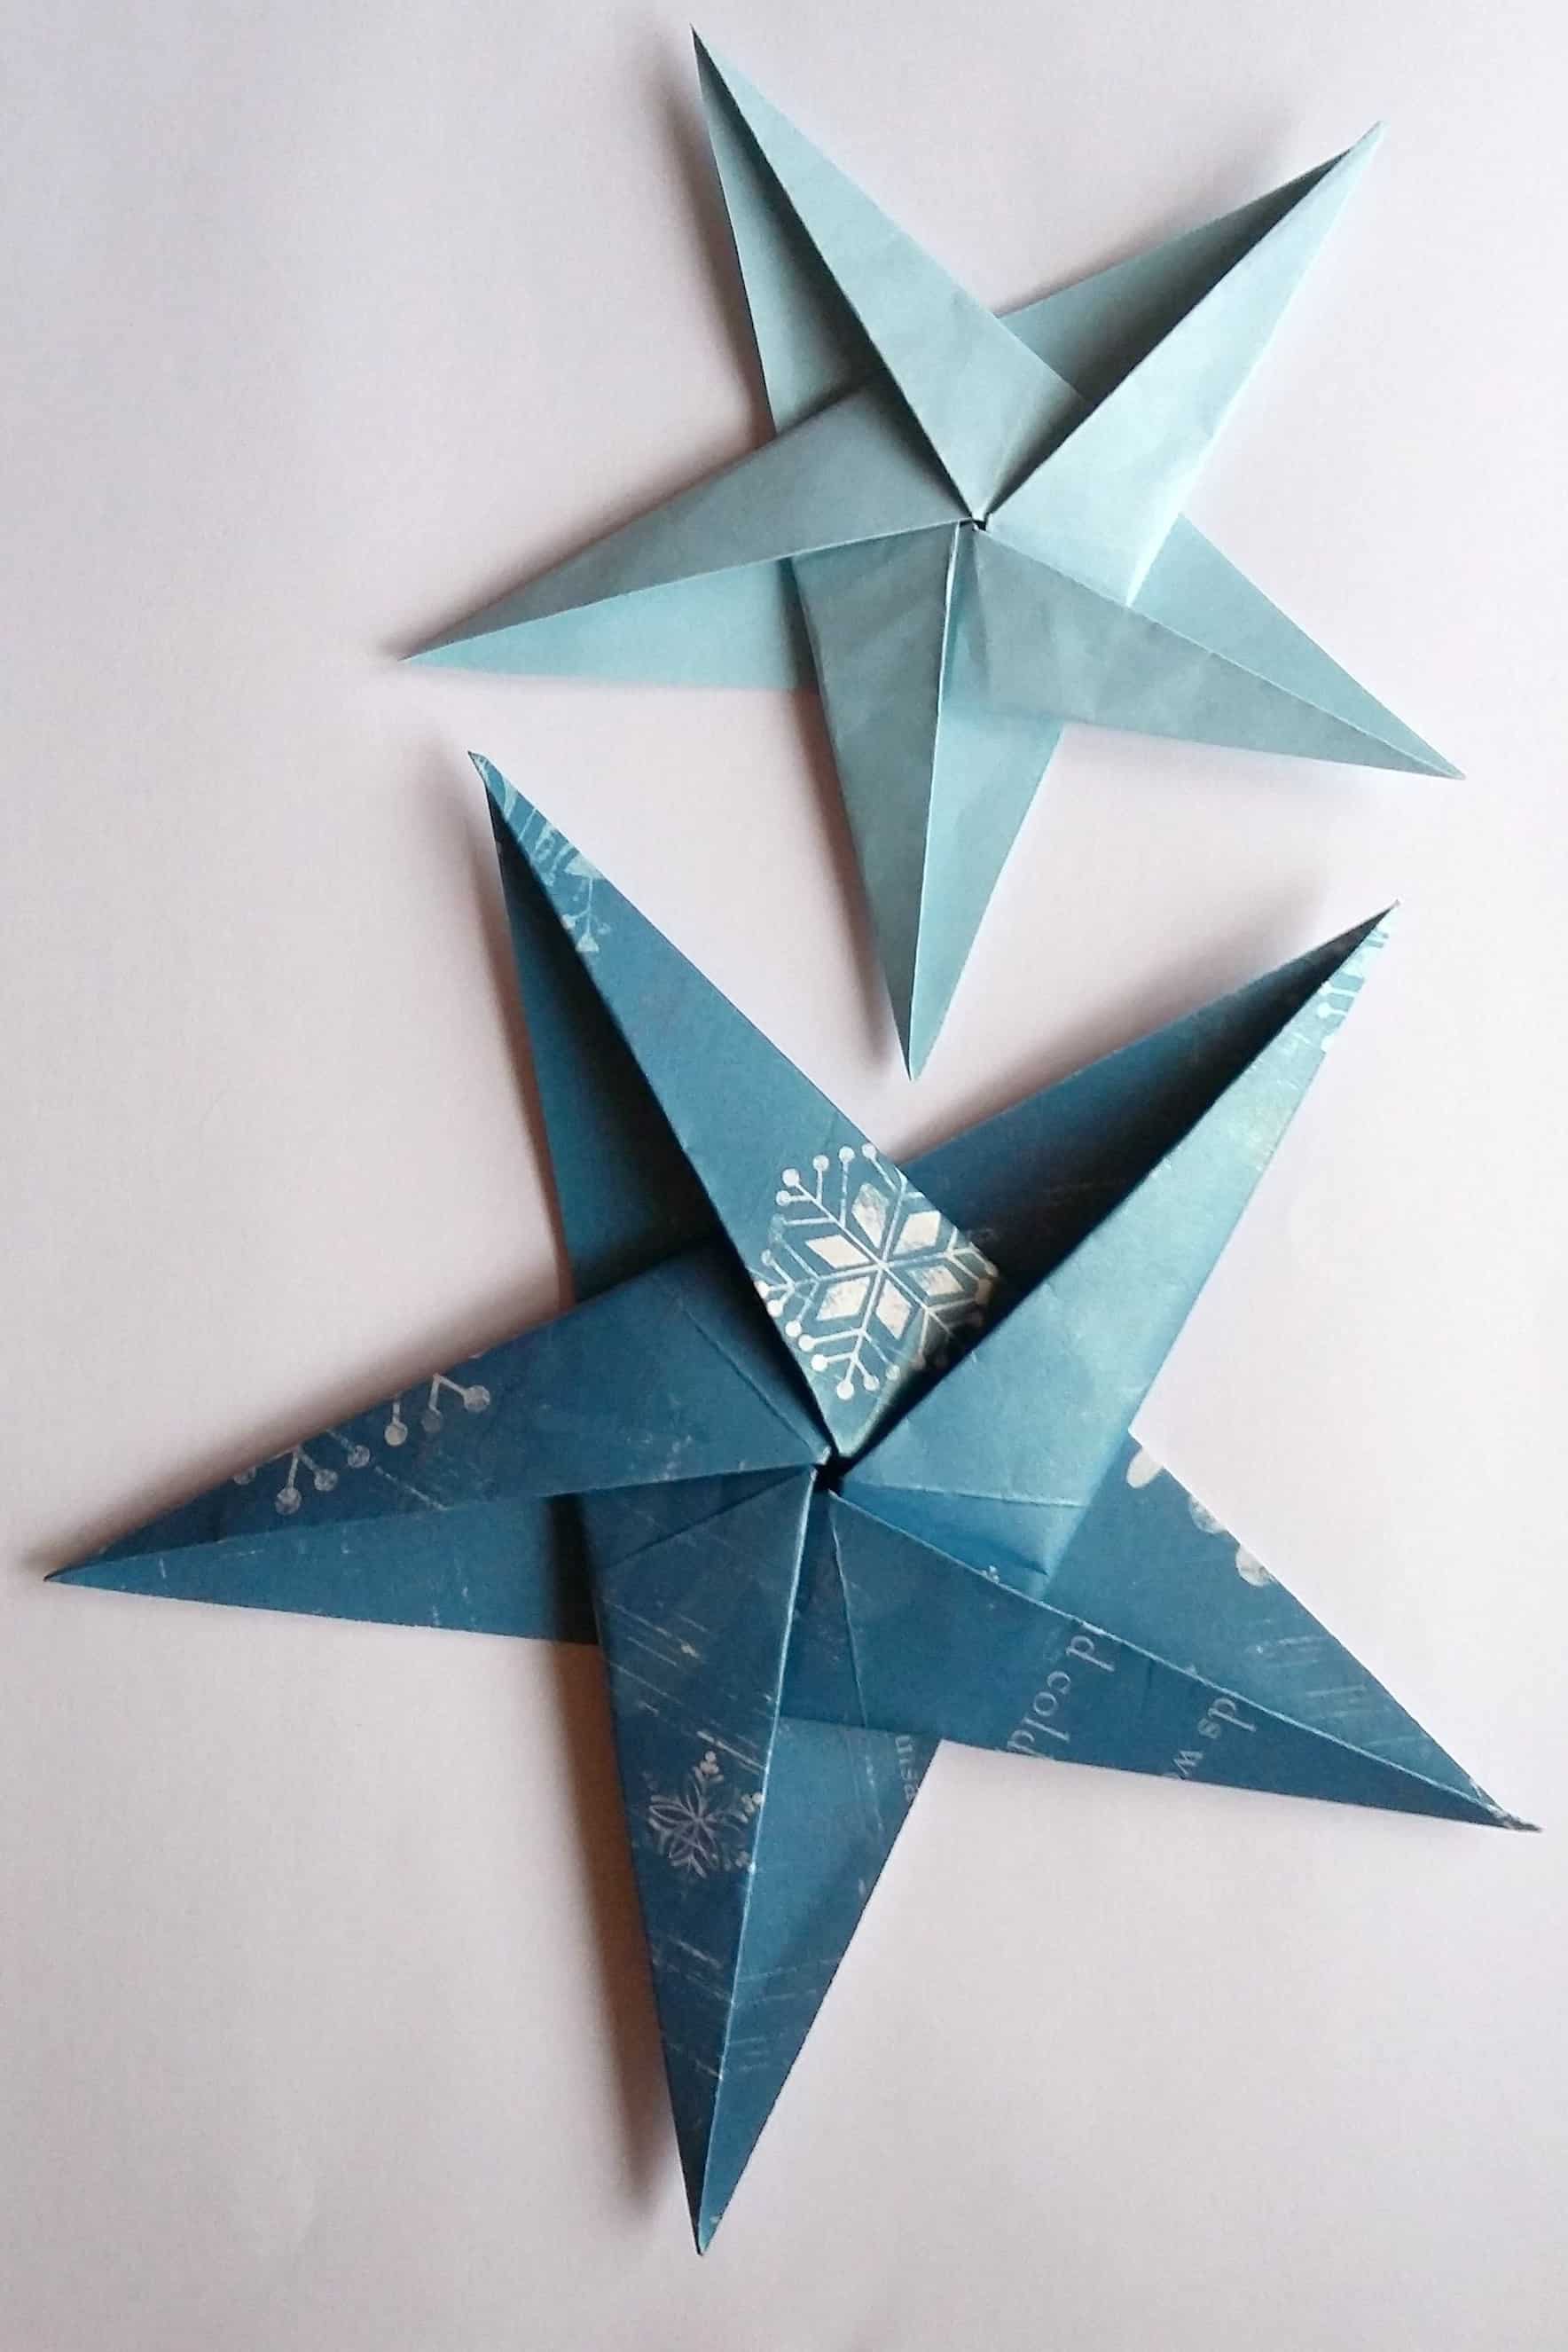 Learn to make a folded paper Christmas tree and an origami star -- simple, quick and effective decorations for Christmas!